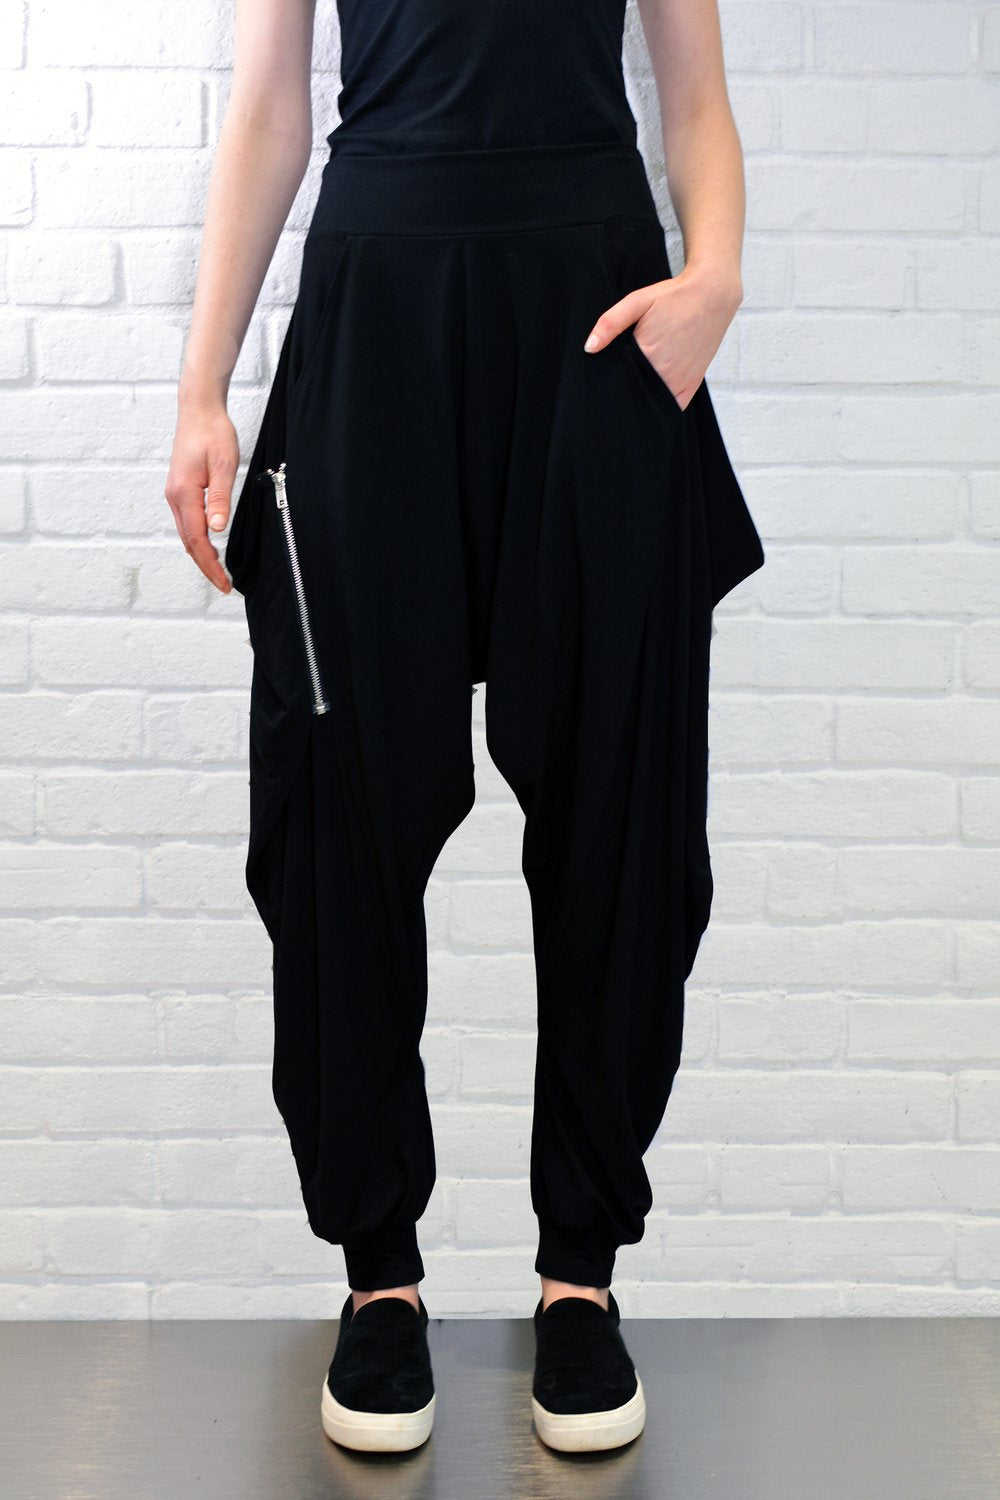 Angle Zipper Pant - Black Solid
Our top selling drop crotch pant! It is high rise and has slouchy side pockets with zipper detailing. With an edgy vibe, these pants are powerful enough to command a room but discrete enough to be a lounge-worthy essential. Made with our 2- way- stretch miracle fabric, these pants are designed to move with you. Feel effortlessly cool and incredibly comfortable, anywhere, anytime and any season. About Me: 85% Rayon, 15% Lycra “Miracle Fabric” 2 way stretch for a move-with-you-